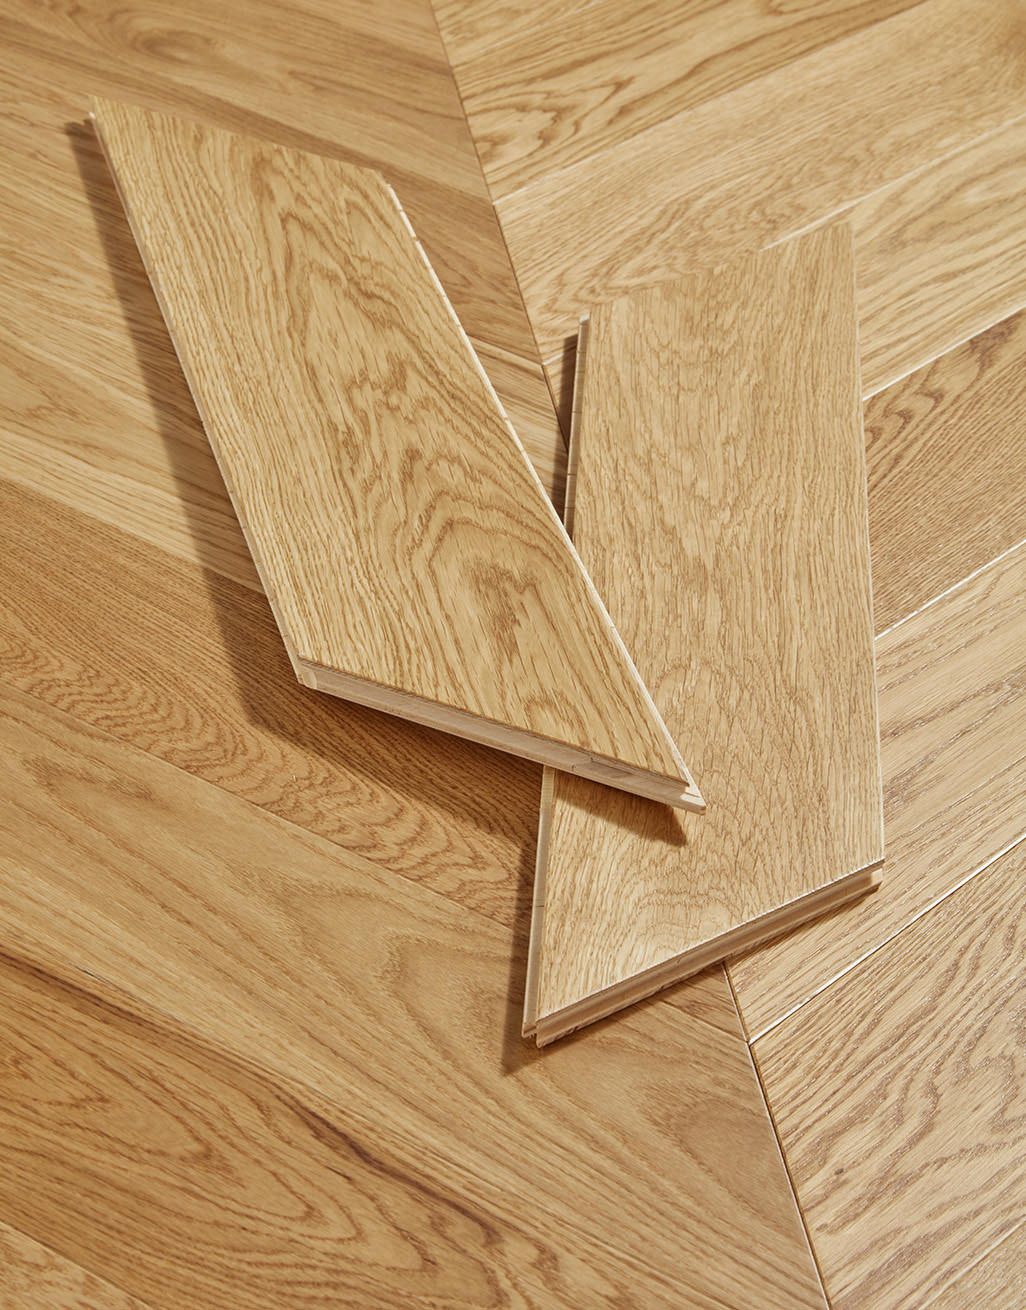 Chelsea Chevron - Natural Oak Brushed & Lacquered Engineered Wood Flooring 3